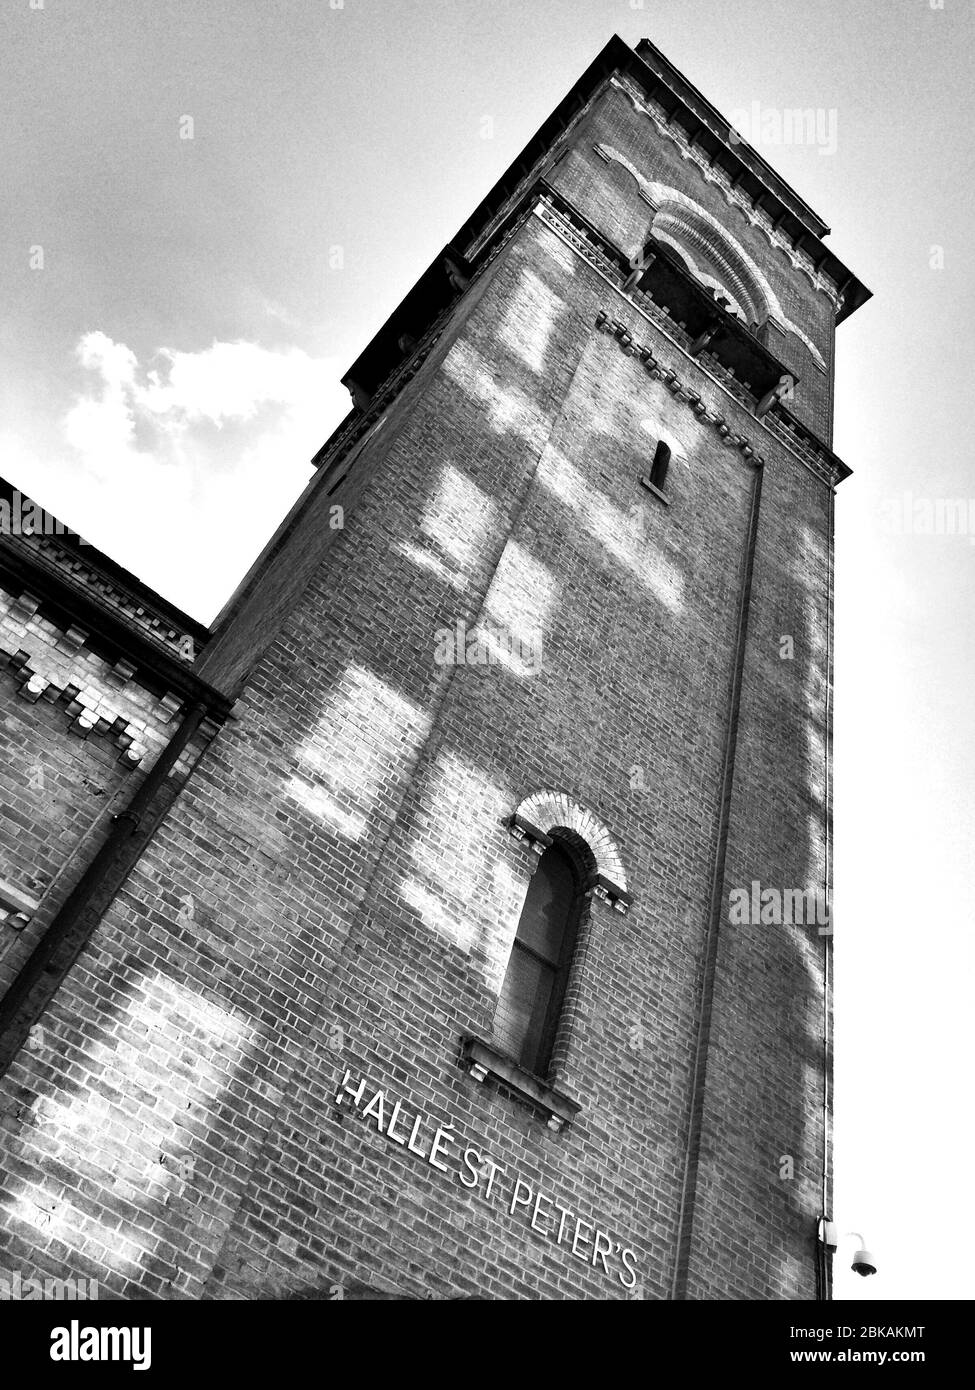 The Halle St Peters, Ancoats, Manchester. Stock Photo